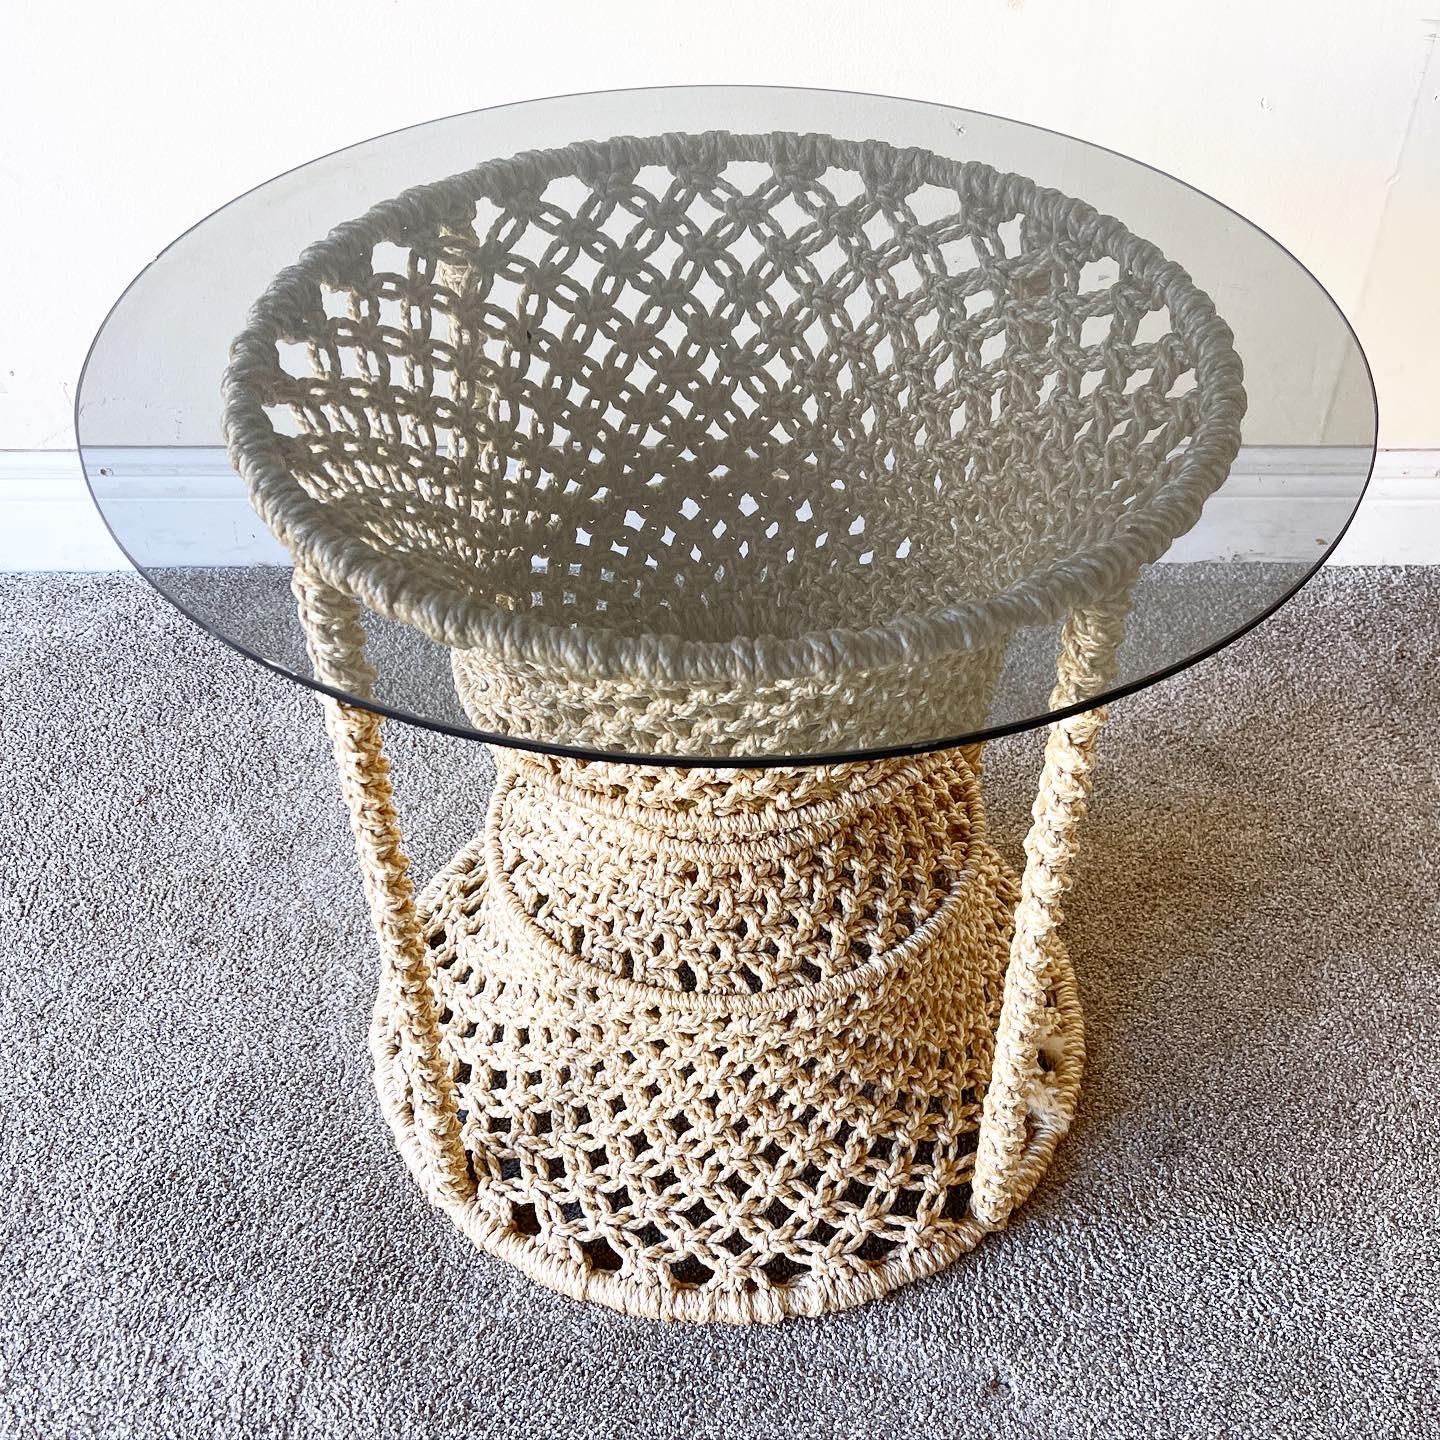 Amazing hand woven macrame side table. Features a tan/beige fabric and smoked glass.

Additional Information:
Material: Fabric
Color: Beige, Tan
Style: Mid-Century Modern
Time Period: 1960s
Place of origin: USA
Dimension: 24ʺ W × 24ʺ D × 20.5ʺ H